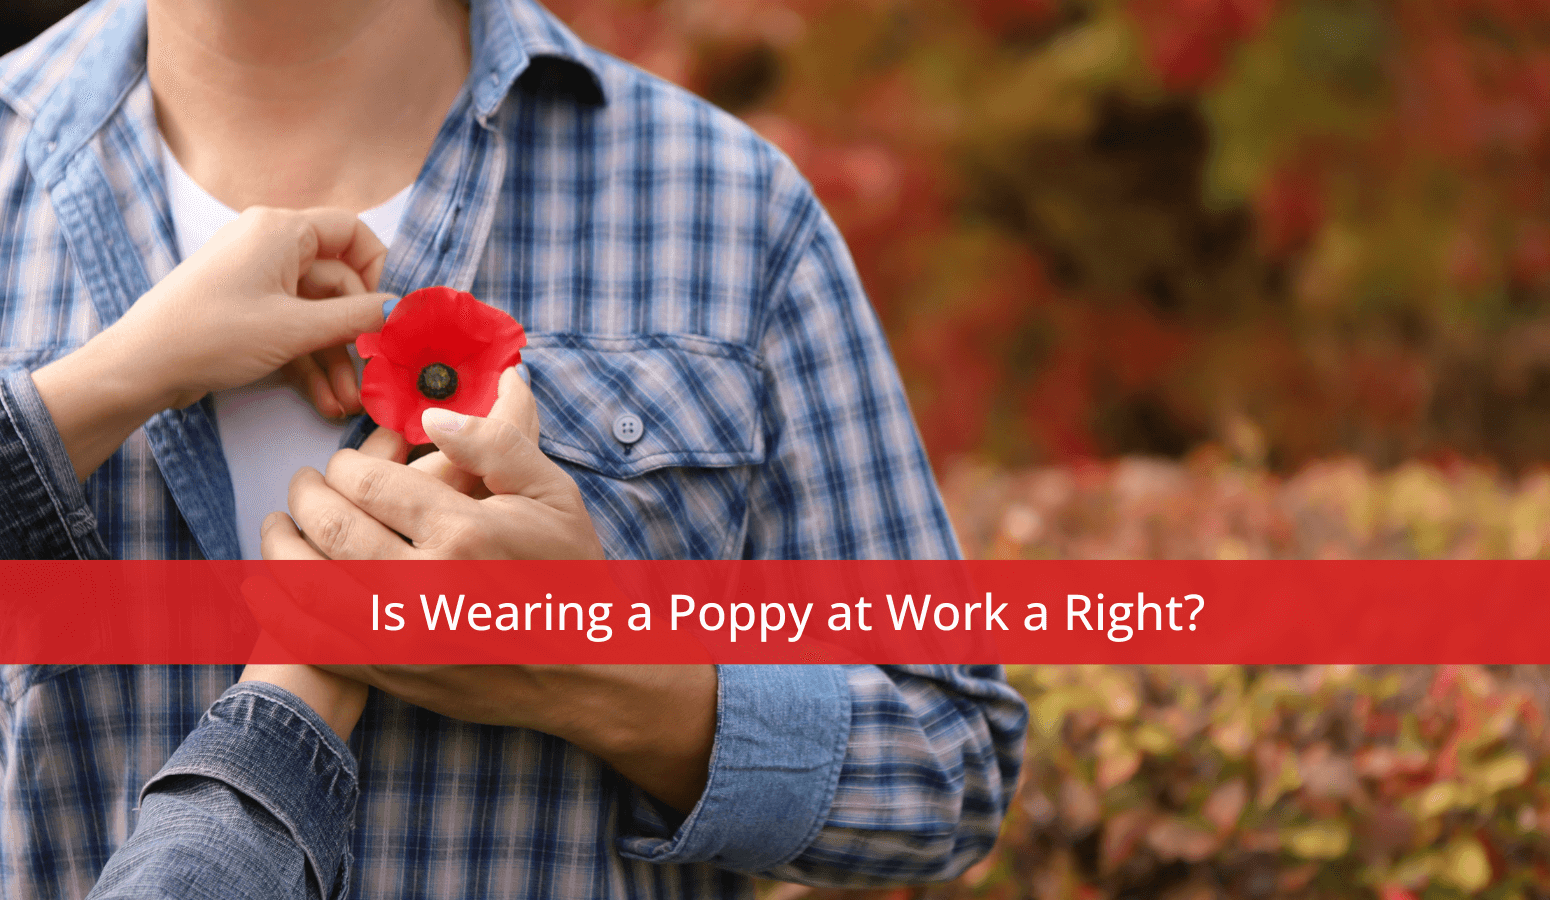 Featured image for “Is Wearing a Poppy at Work a Right?”